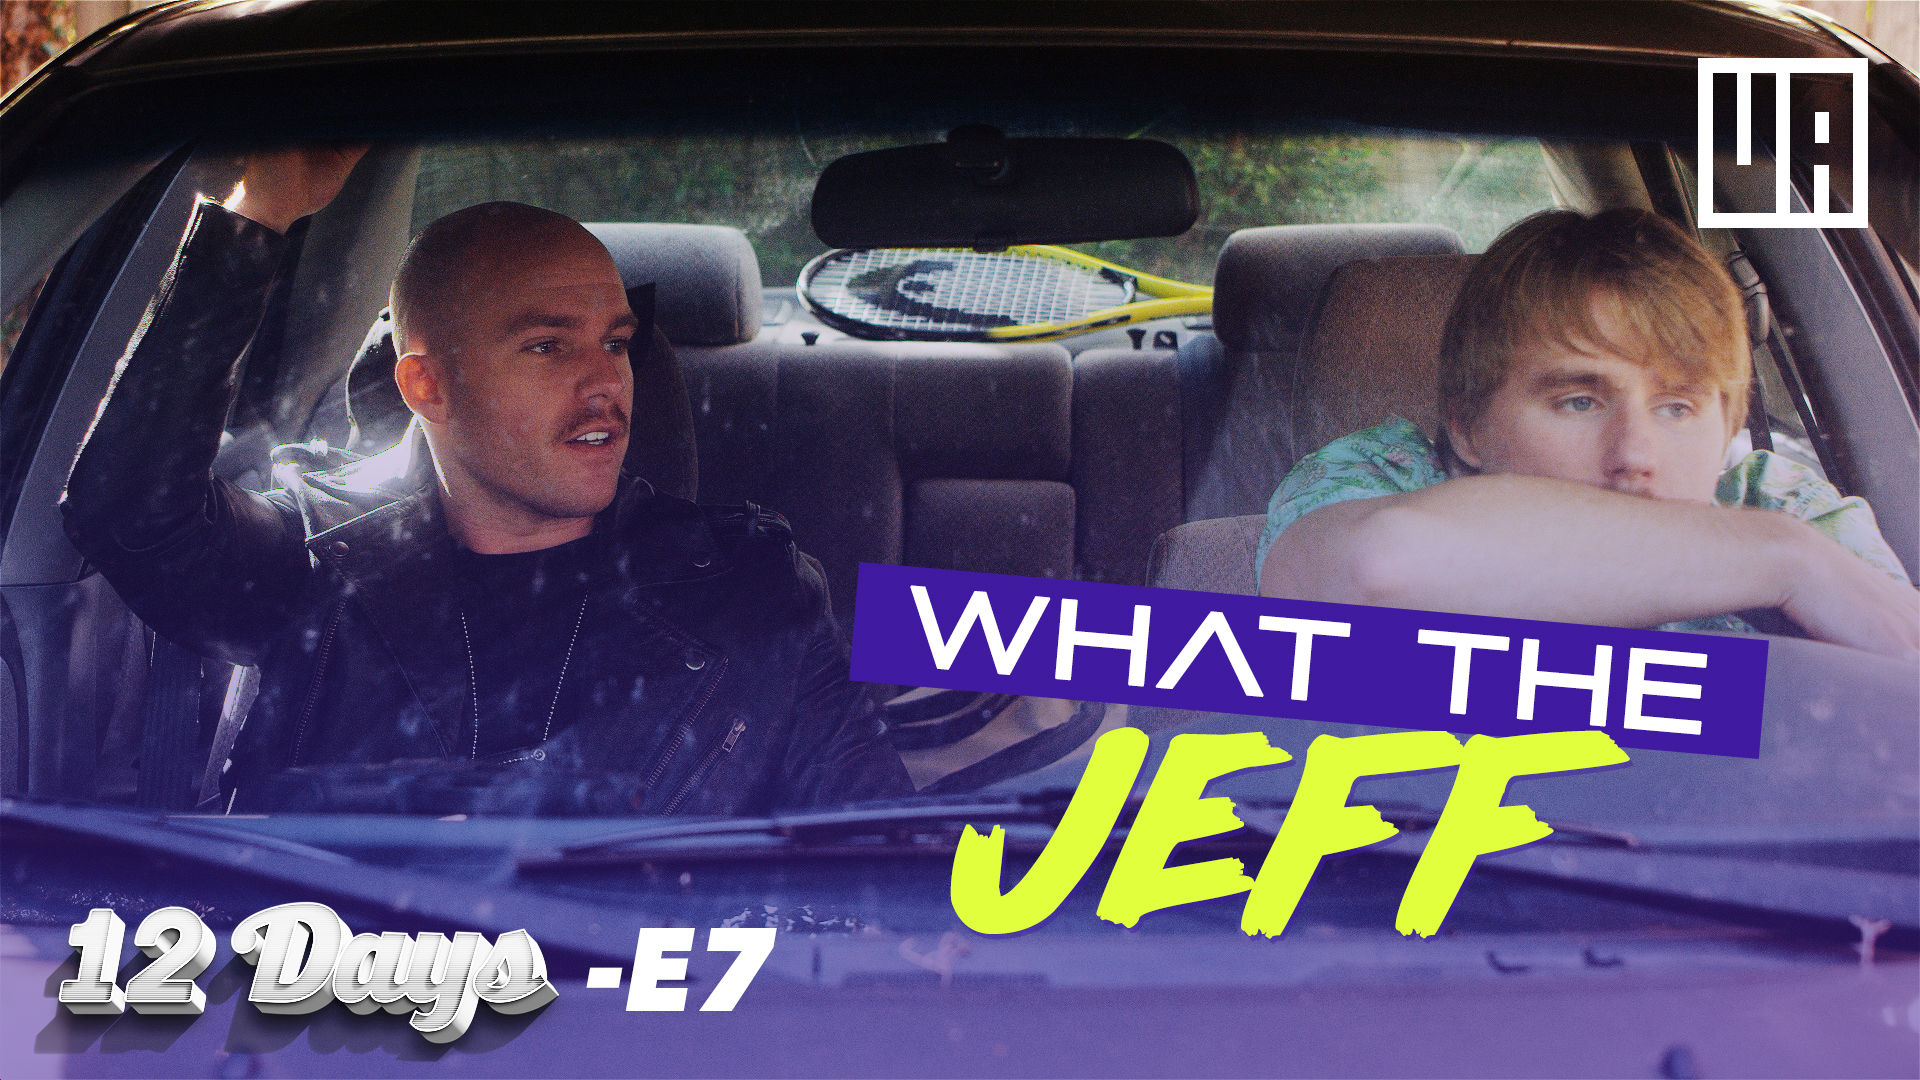 E7 - What the Jeff? - "Pizza Order"